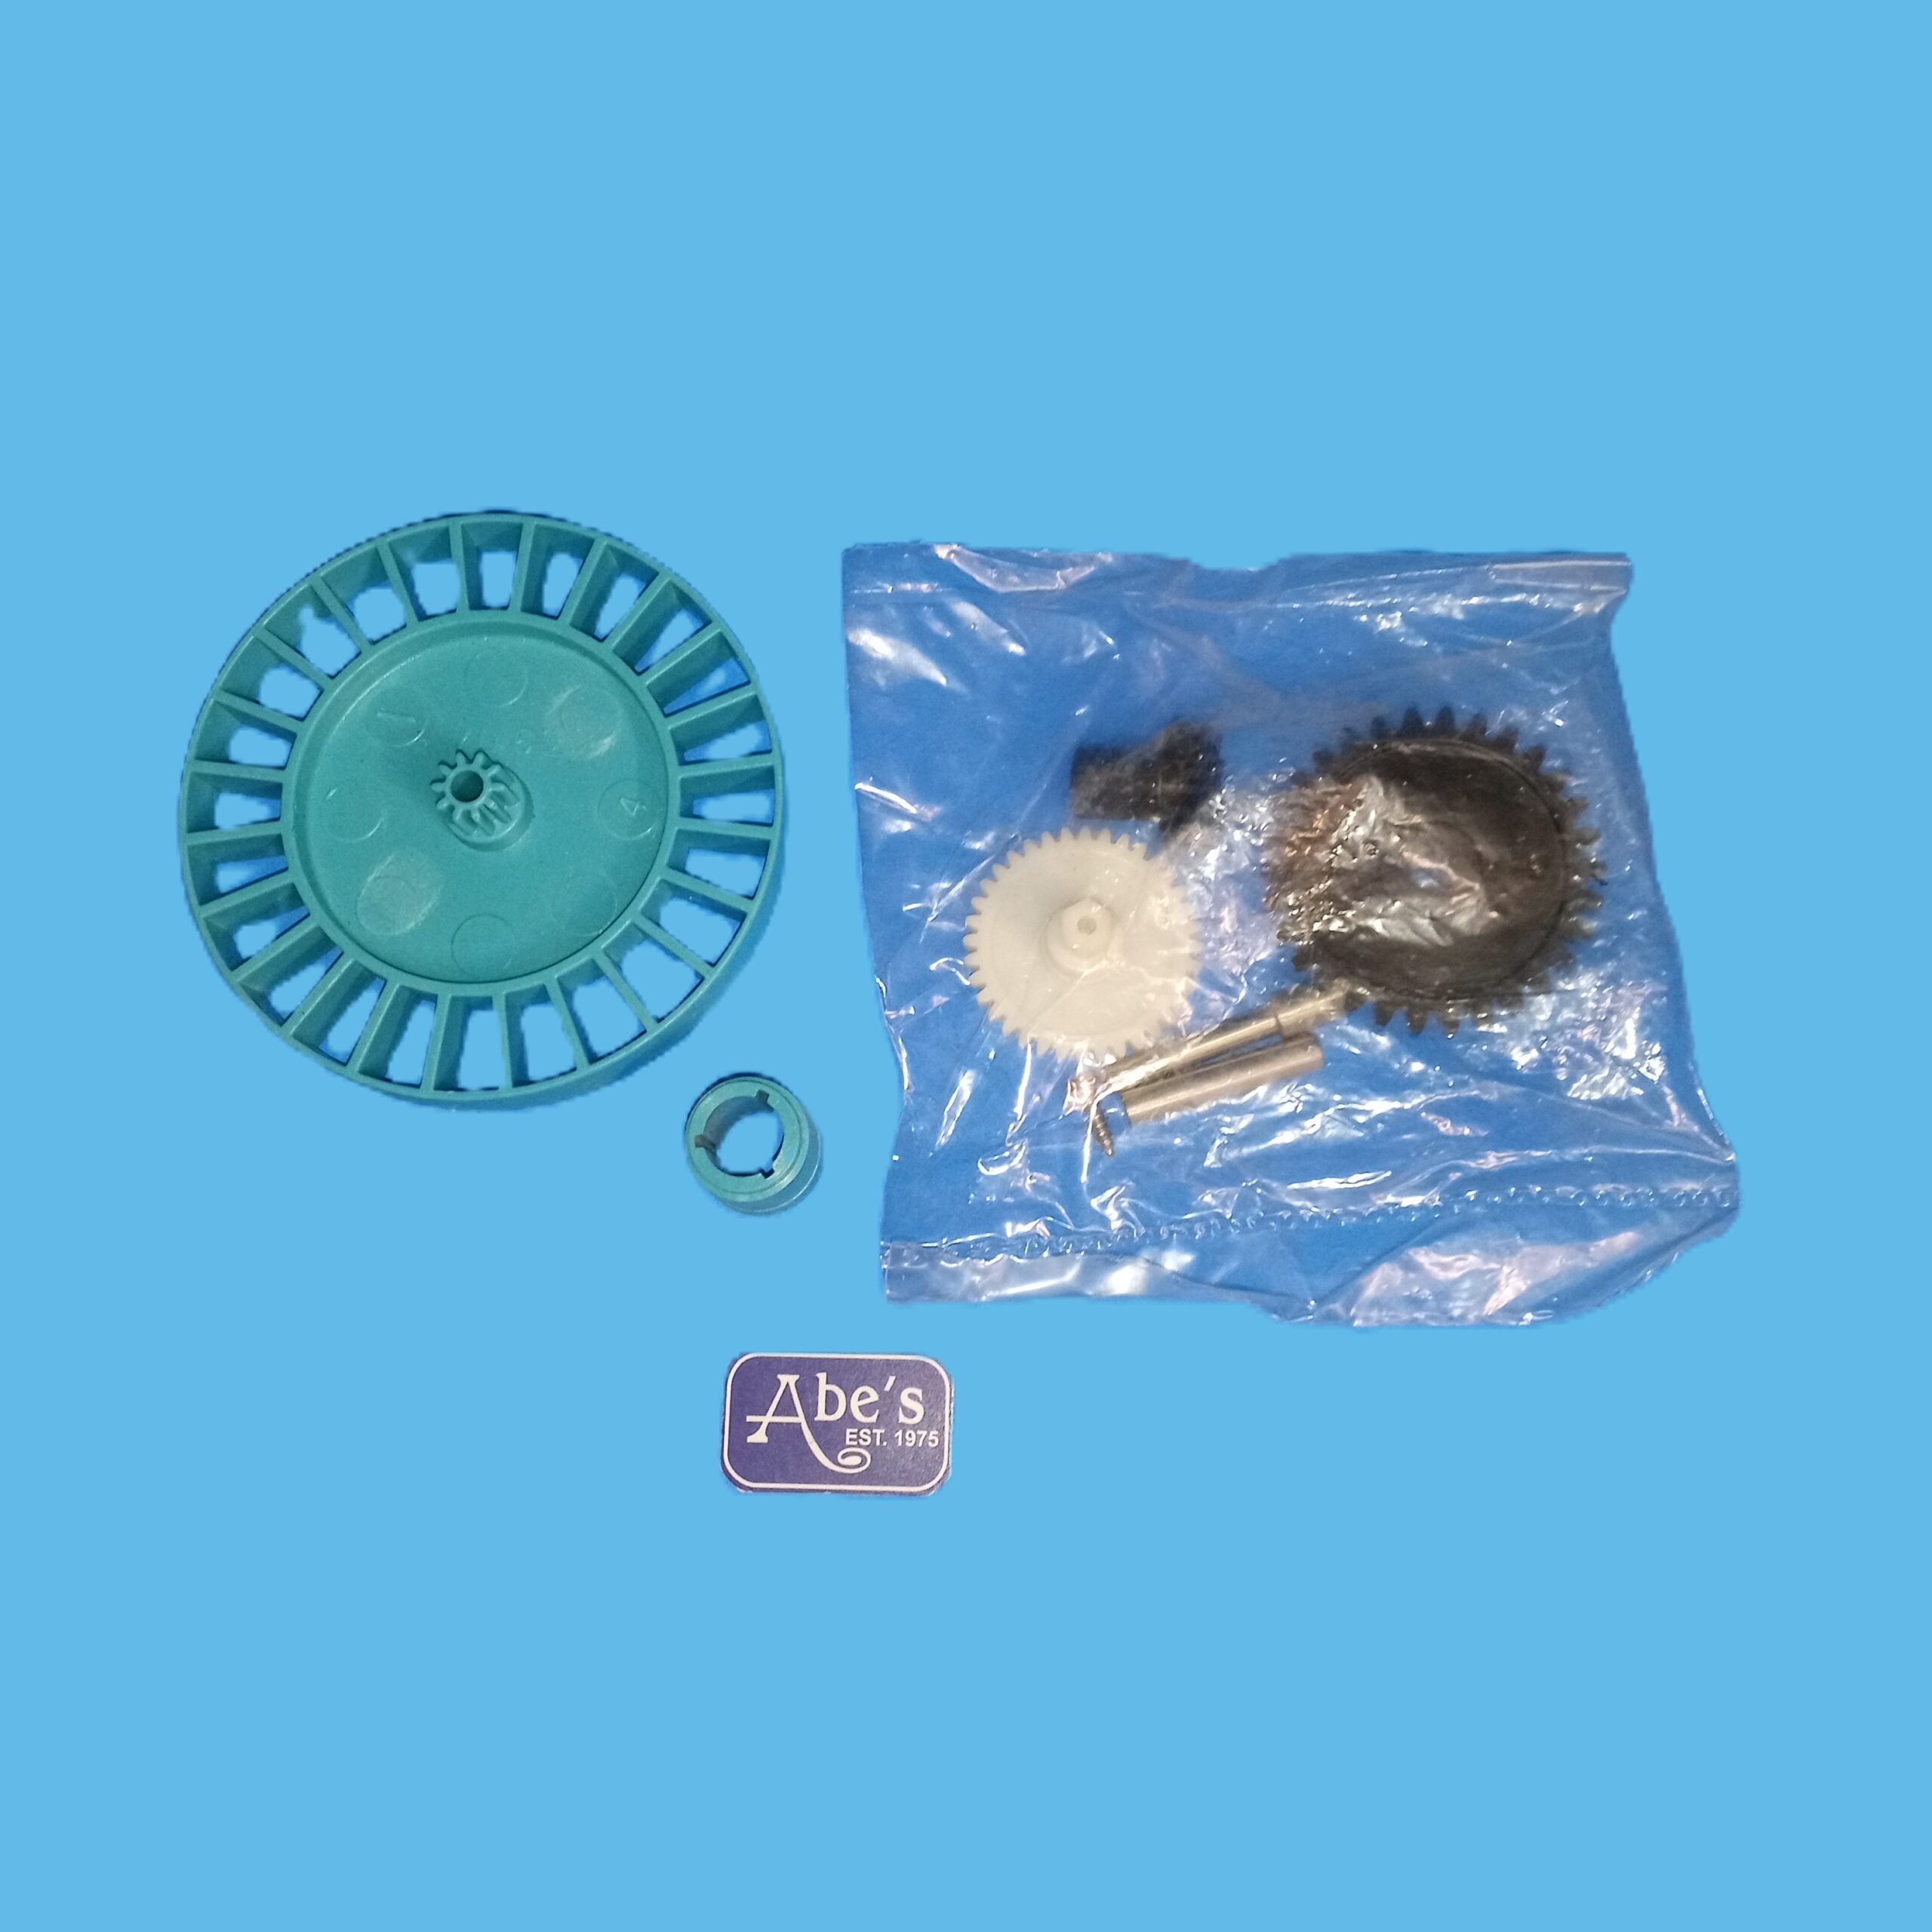 Hayward Med Turbine Spindle Gear Kit for Hayward Pool Cleaners / $44.75 / Hard to Find Pool cleaner parts? Find Hard to Find Parts at Abe's Pools & Spas.